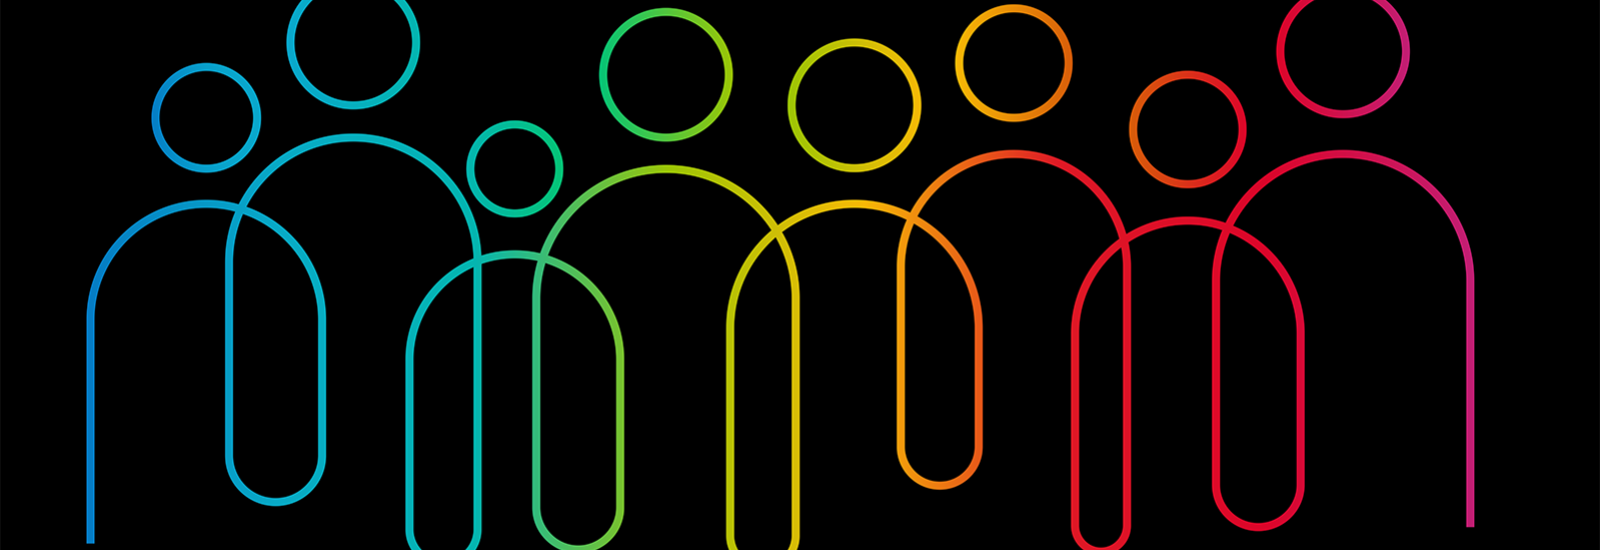 Graphic of human silhouettes in a full rainbow of colors